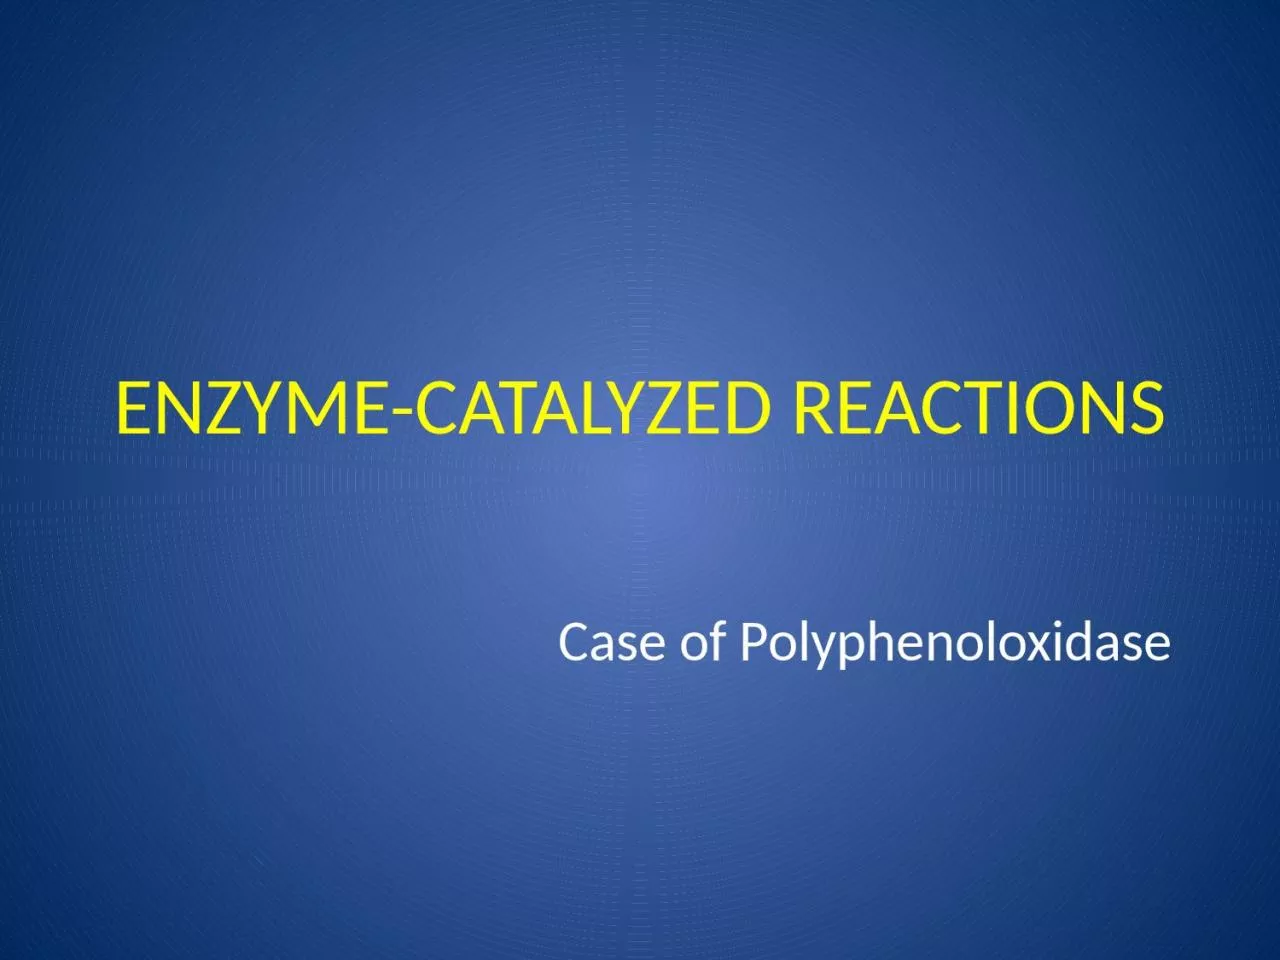 ENZYME-CATALYZED REACTIONS